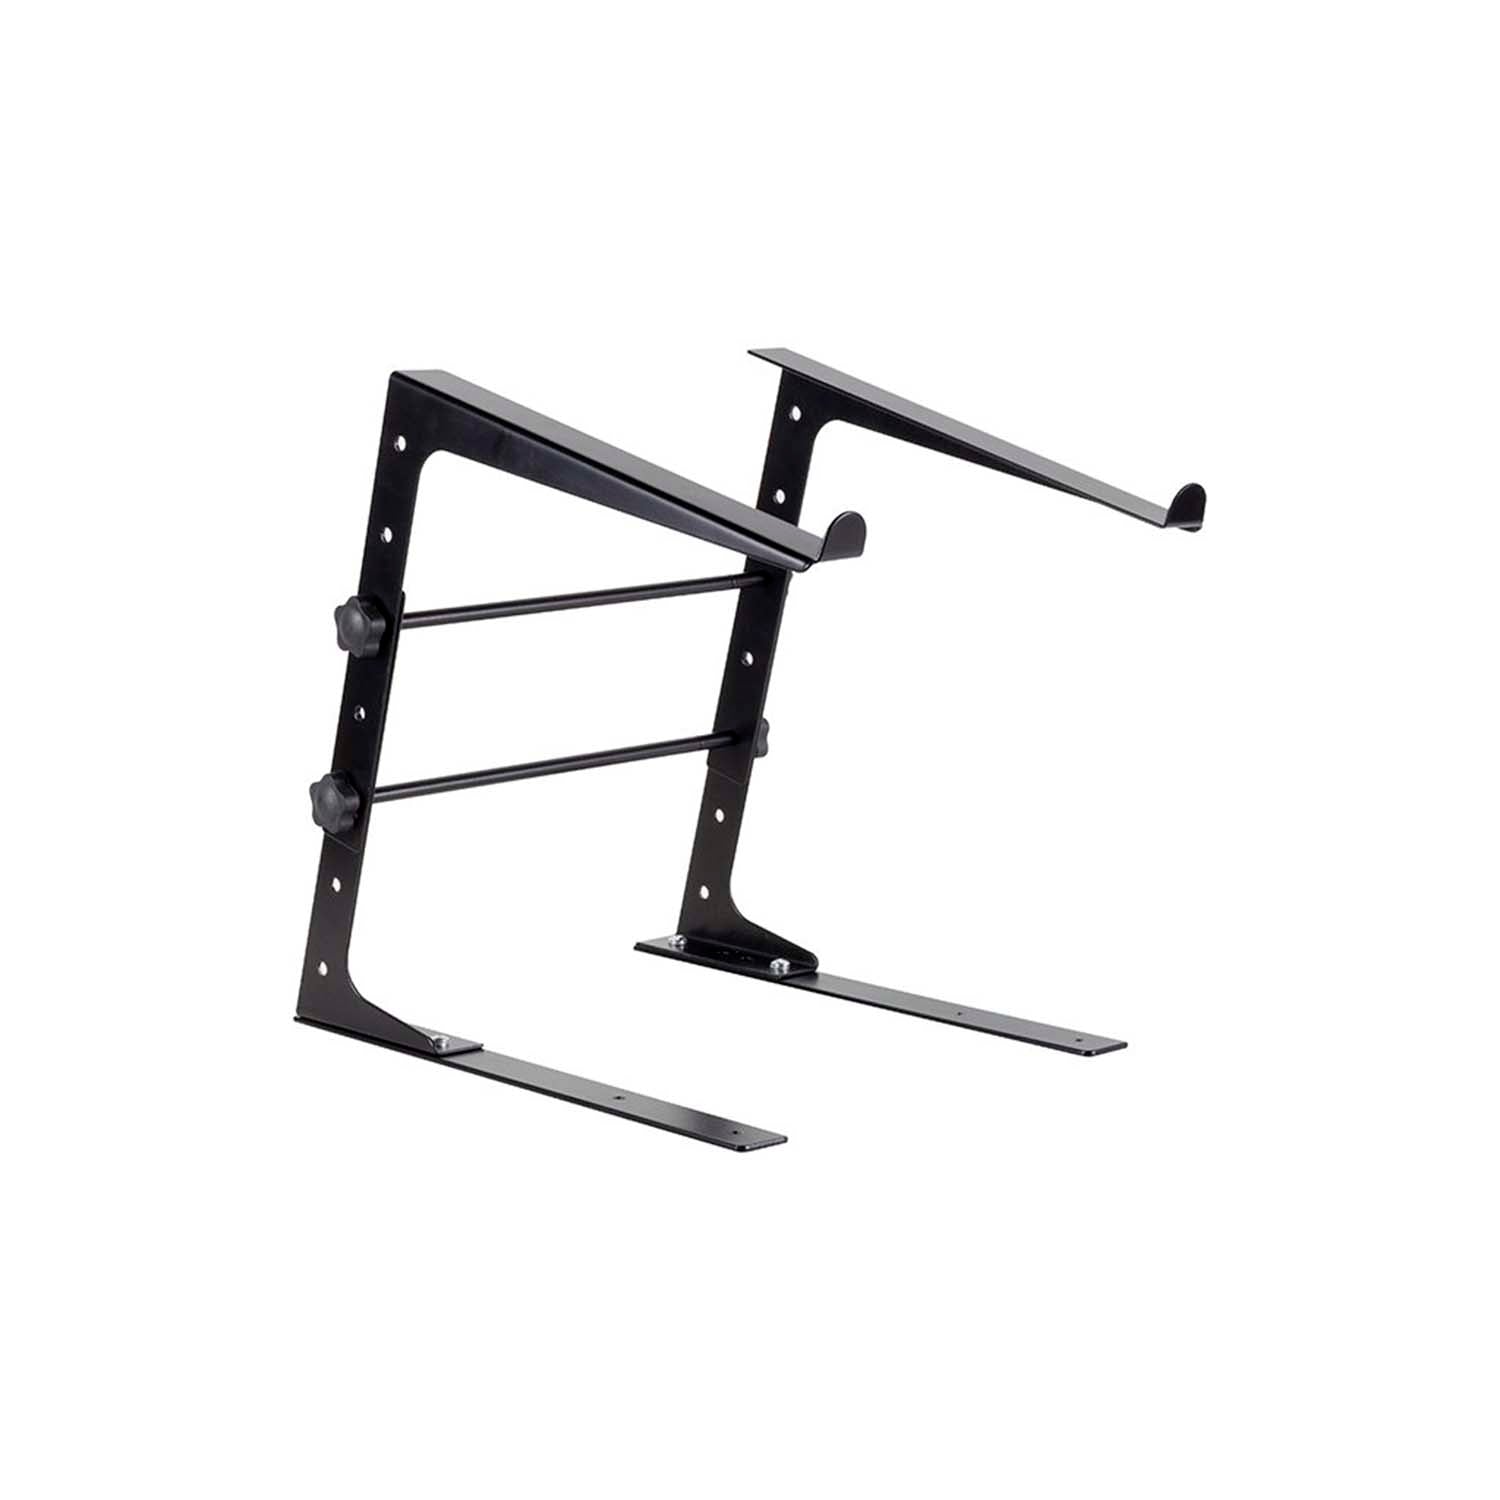 B-Stock: Headliner HL20001 Highland Laptop Stand With 3 Different Mounting Options - Hollywood DJ